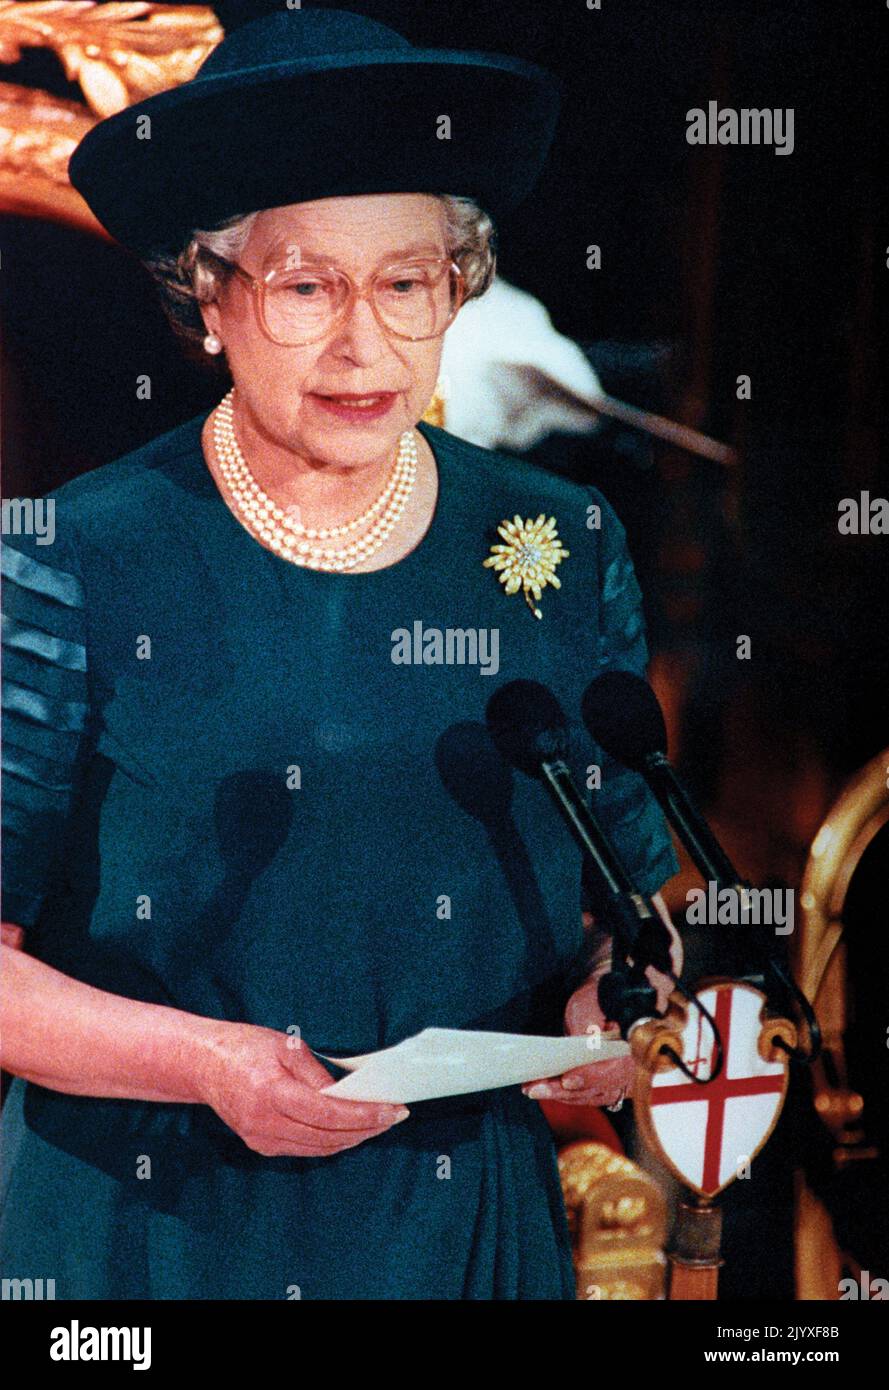 File photo dated 24/11/1992 of Queen Elizabeth II delivering her speech after a Guildhall luncheon to mark the 40th anniversary of her accession to the throne in which she branded 1992 her 'Annus Horribilis' due to criticisms of the Royal family. The Queen's Annus Horribilis speech at Guildhall on 24 November, 1992, marking 40 years on the throne, followed a year which had seen the Prince and Princess of Wales at war, the Duke and Duchess of York separated, Princess Anne divorced, Windsor Castle went up in flames and the publication of Andrew Morton's book: 'Diana: Her True Story'. In December Stock Photo